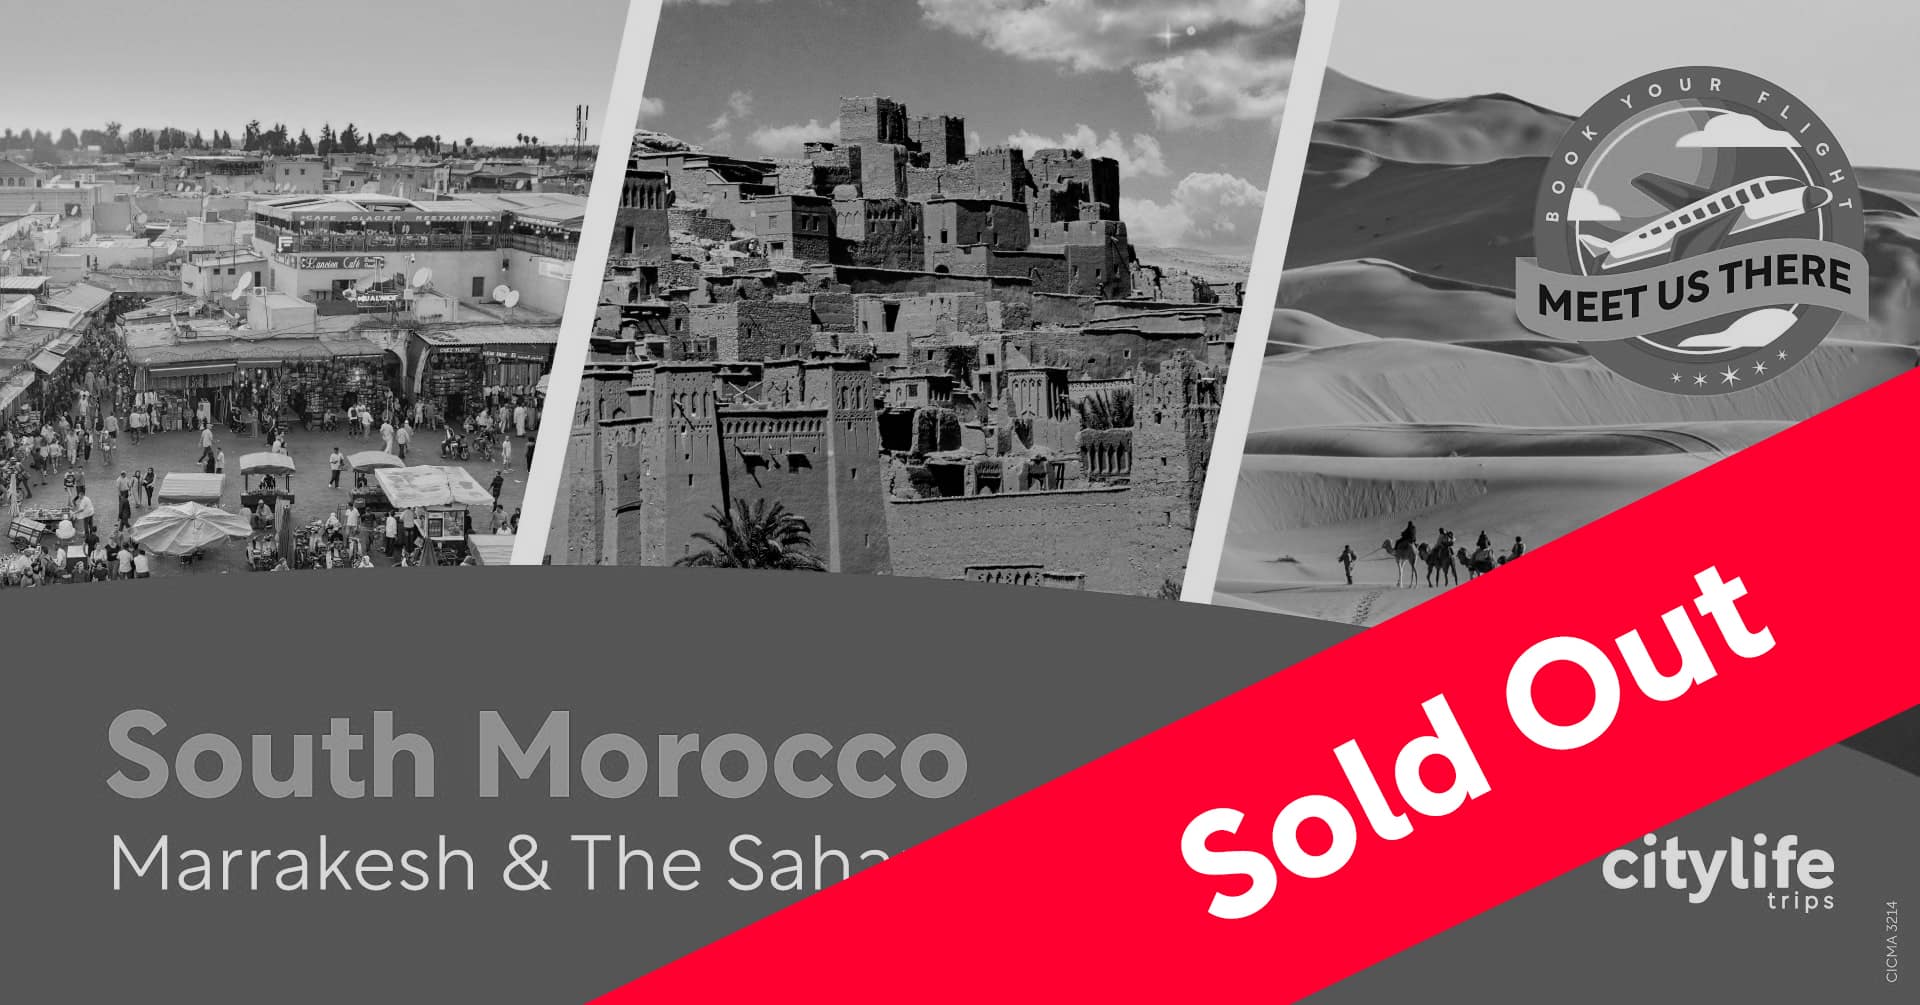 sold-out-south-morocco